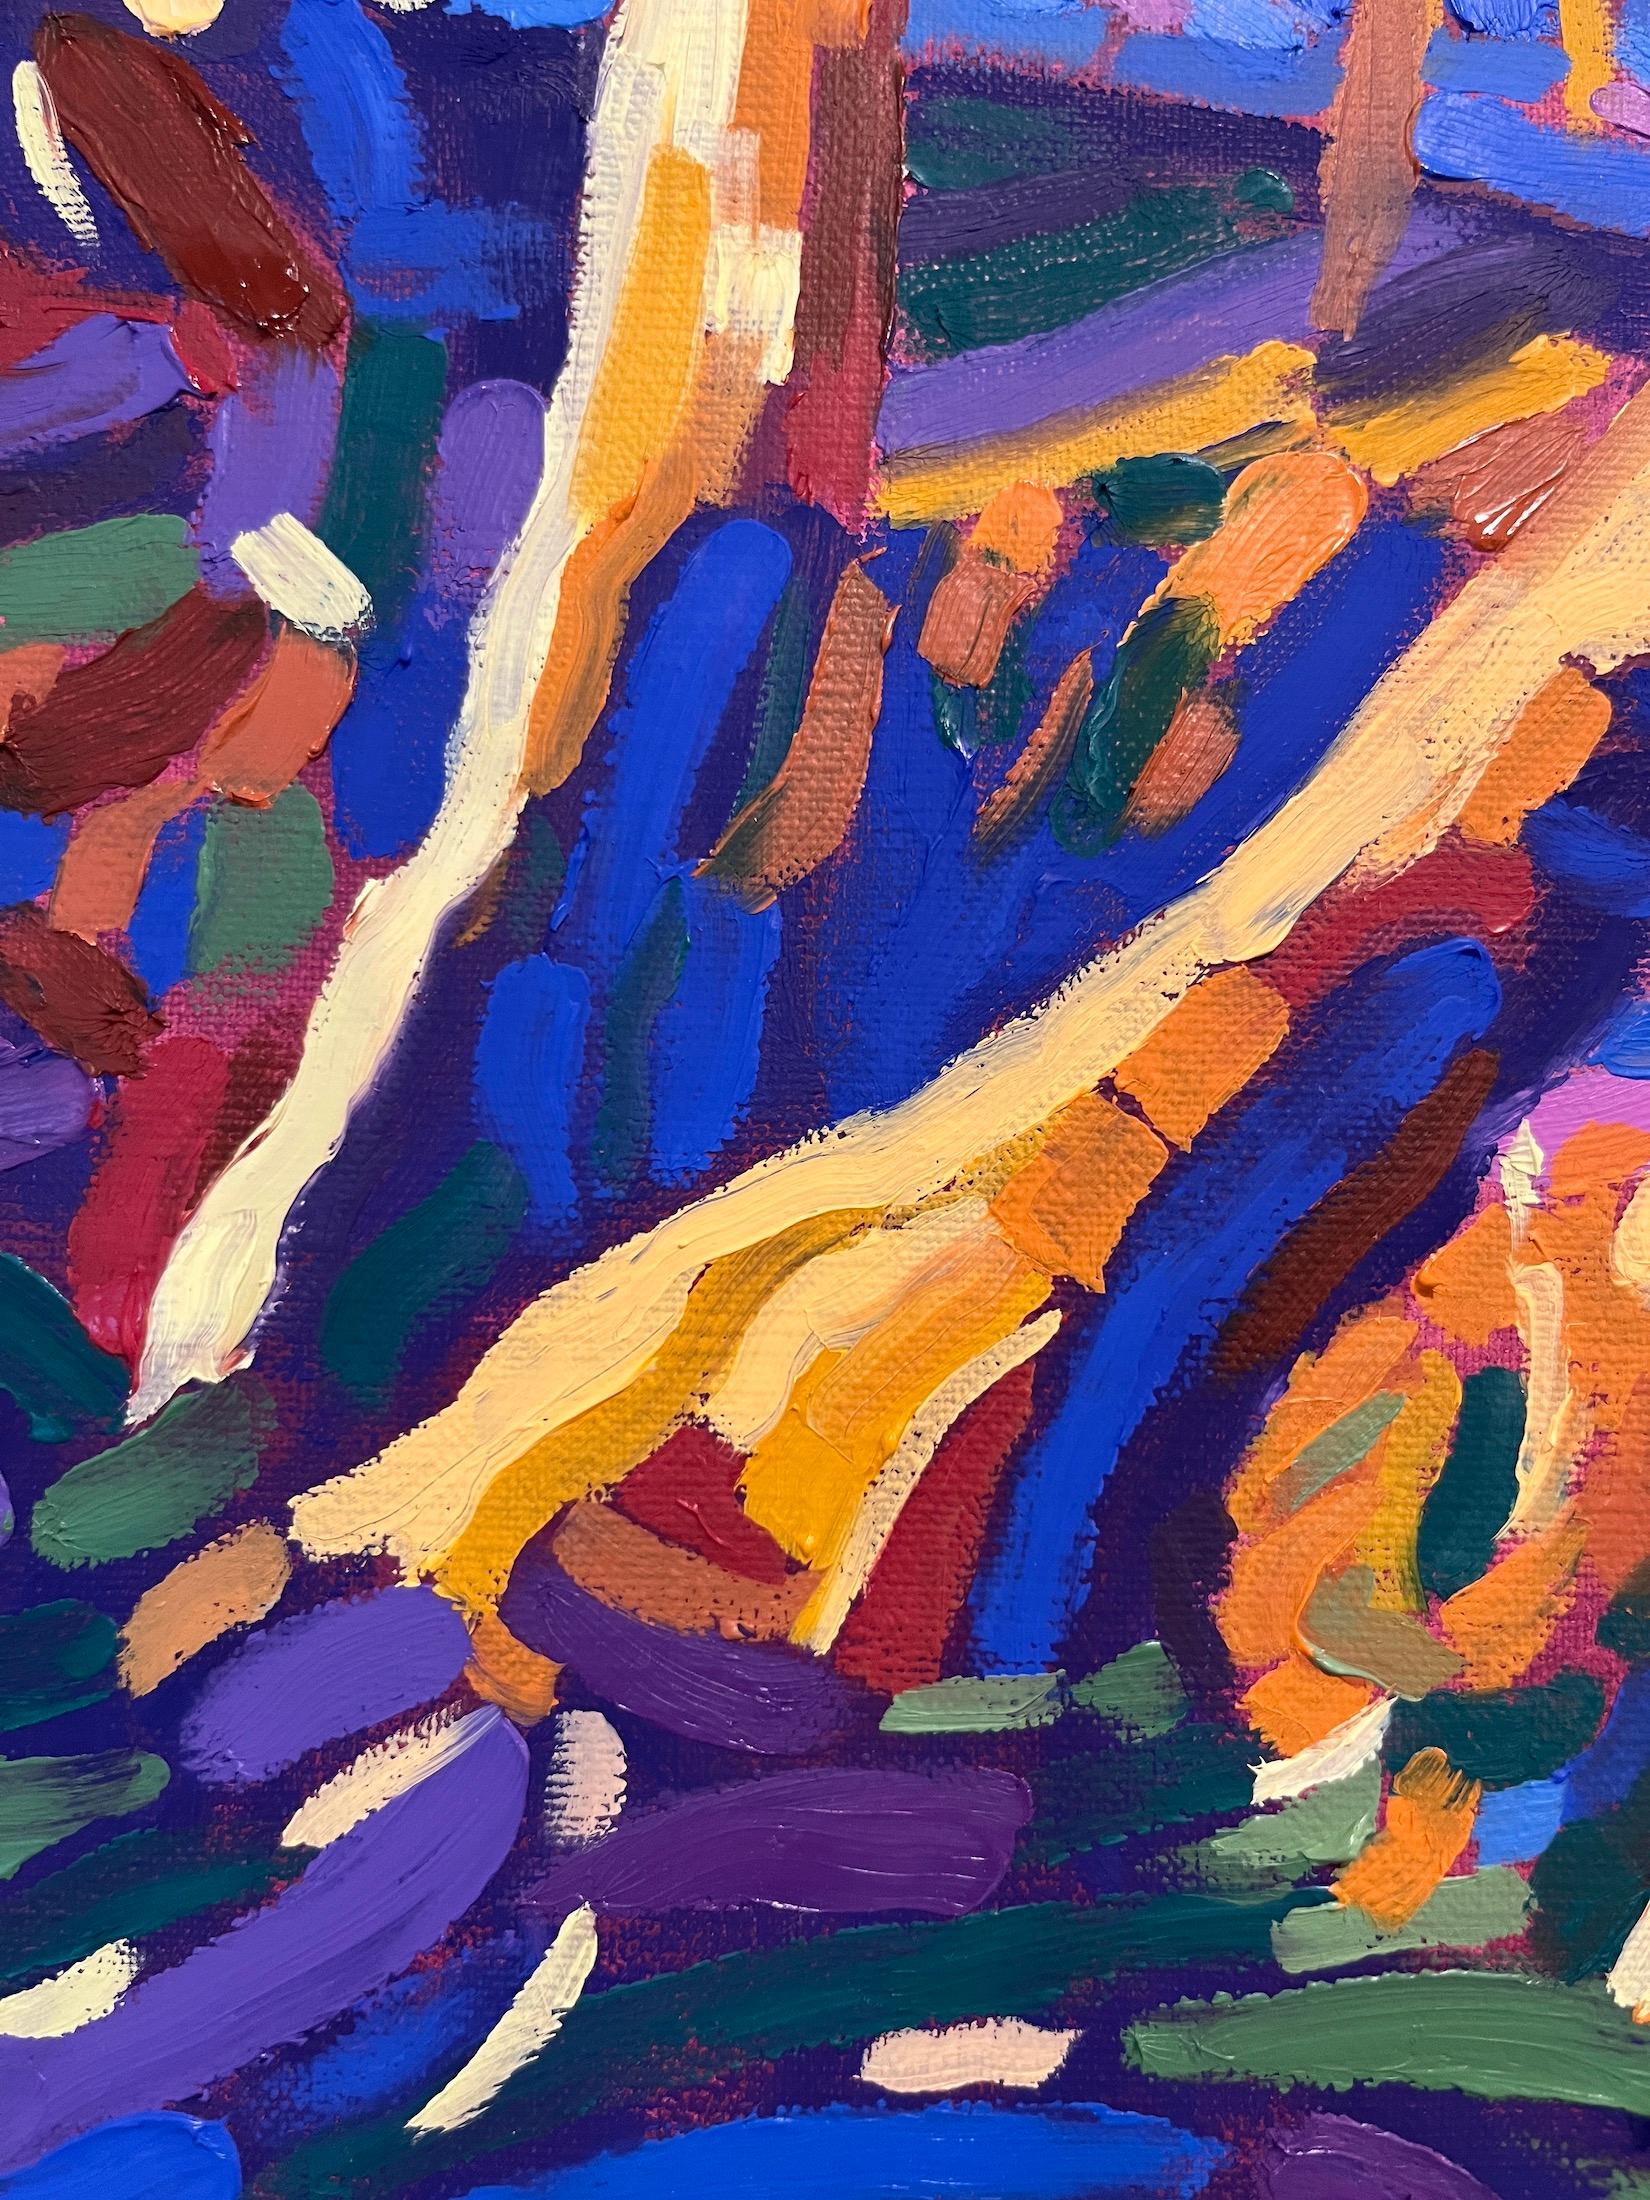 “Leggera” by oil painter Marcia Wise is a dynamic, colorful, and textured 10 x 20 x 1 inch oil painting full of gestural marks made with brushes and gloved fingers using stunning hues of blues, greens, purples, magentas and earth tones. Capturing